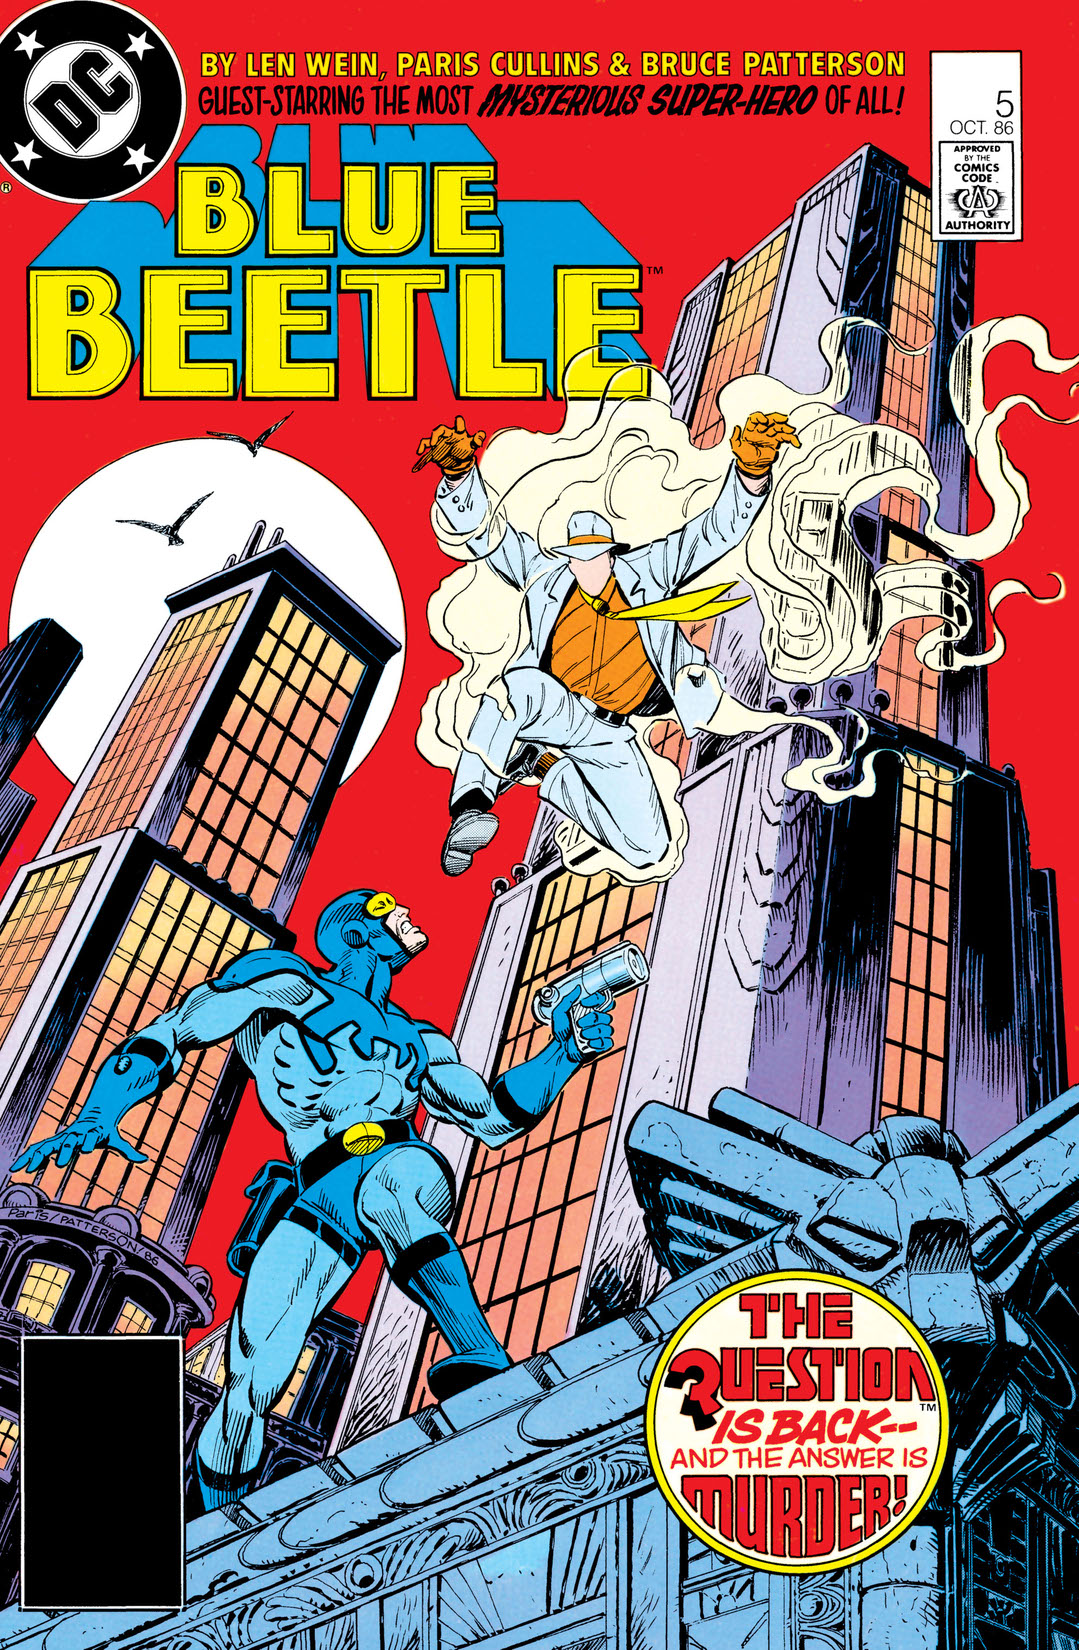 Blue Beetle (1986-) #5 preview images